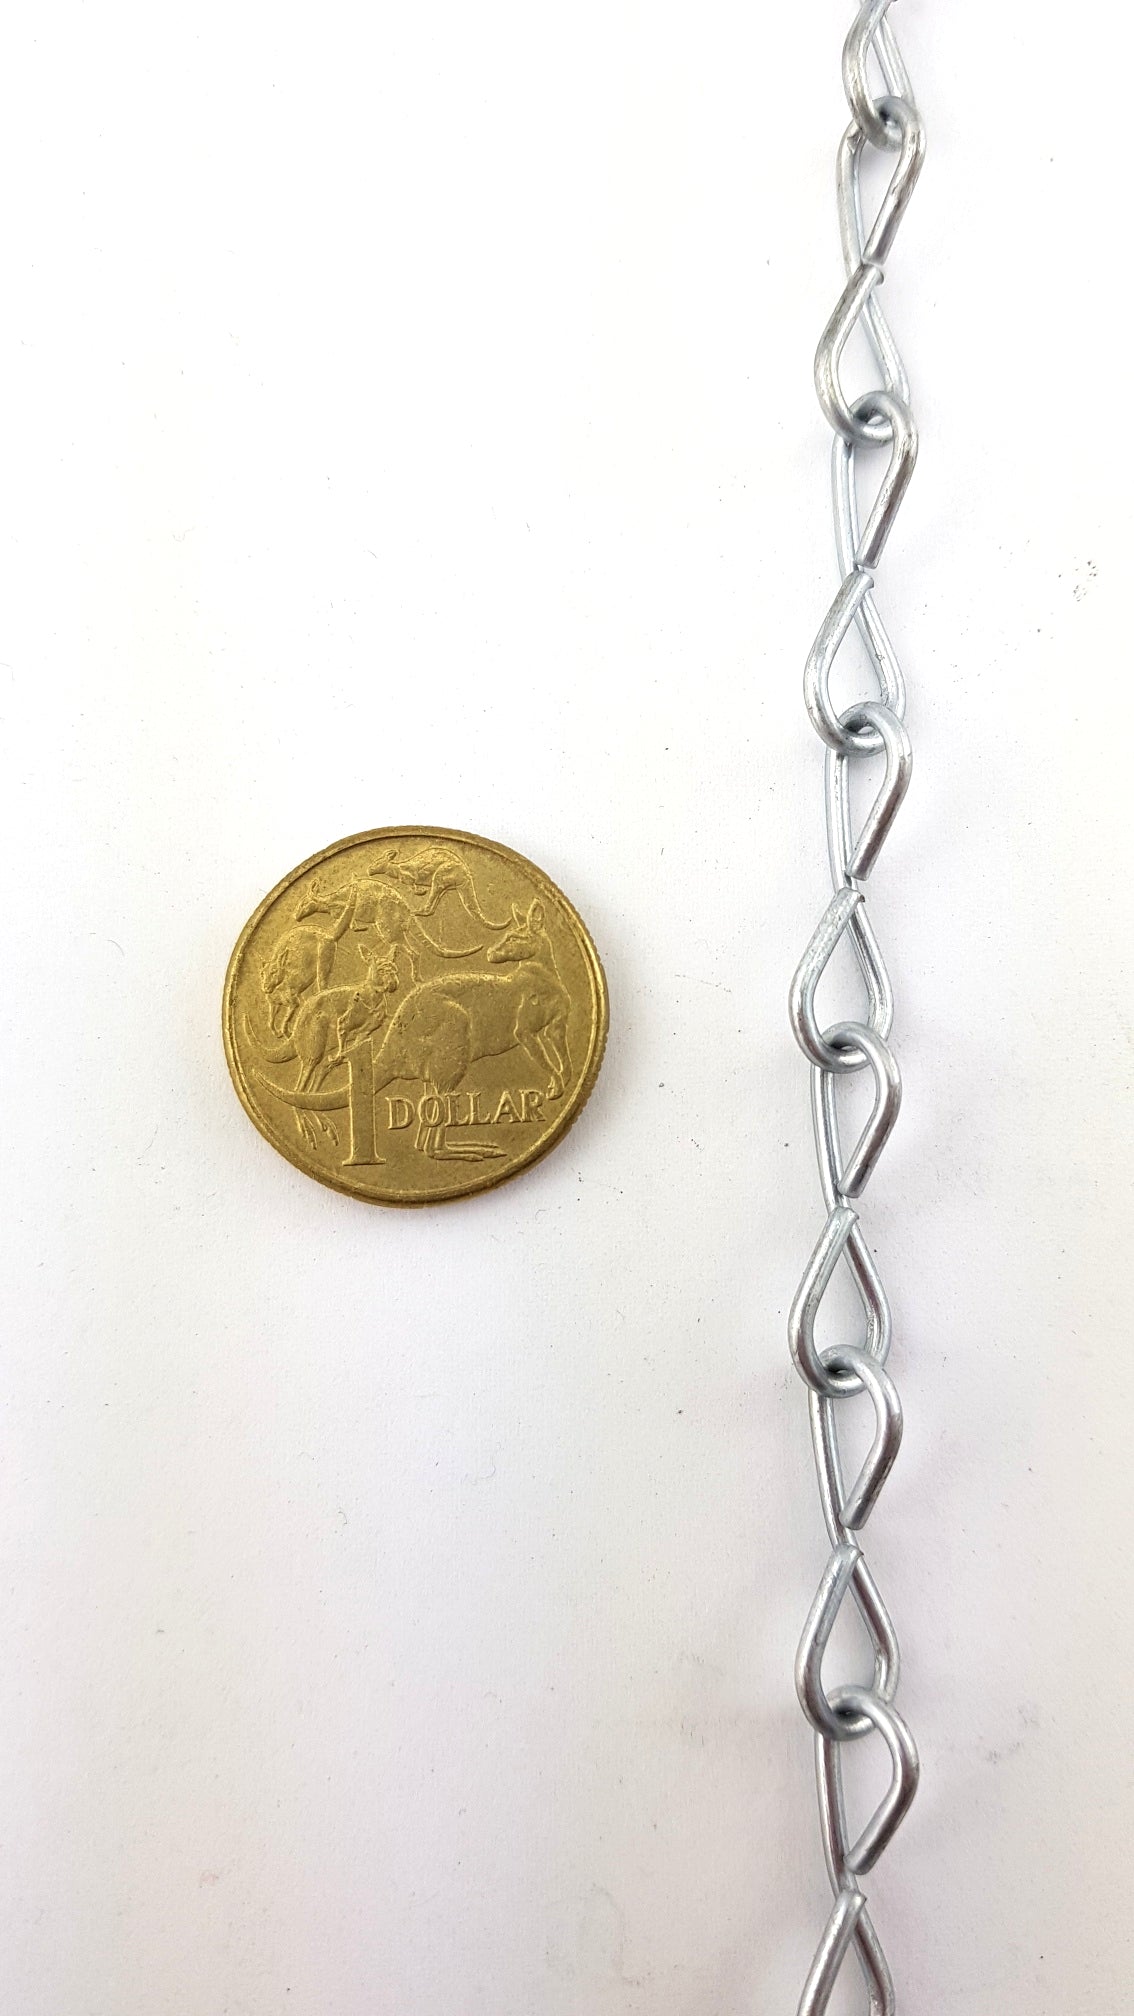 Australian made Single Jack Chain in galvanised finish, size 1.6mm and quantity of 50 metres. Melbourne, Australia.